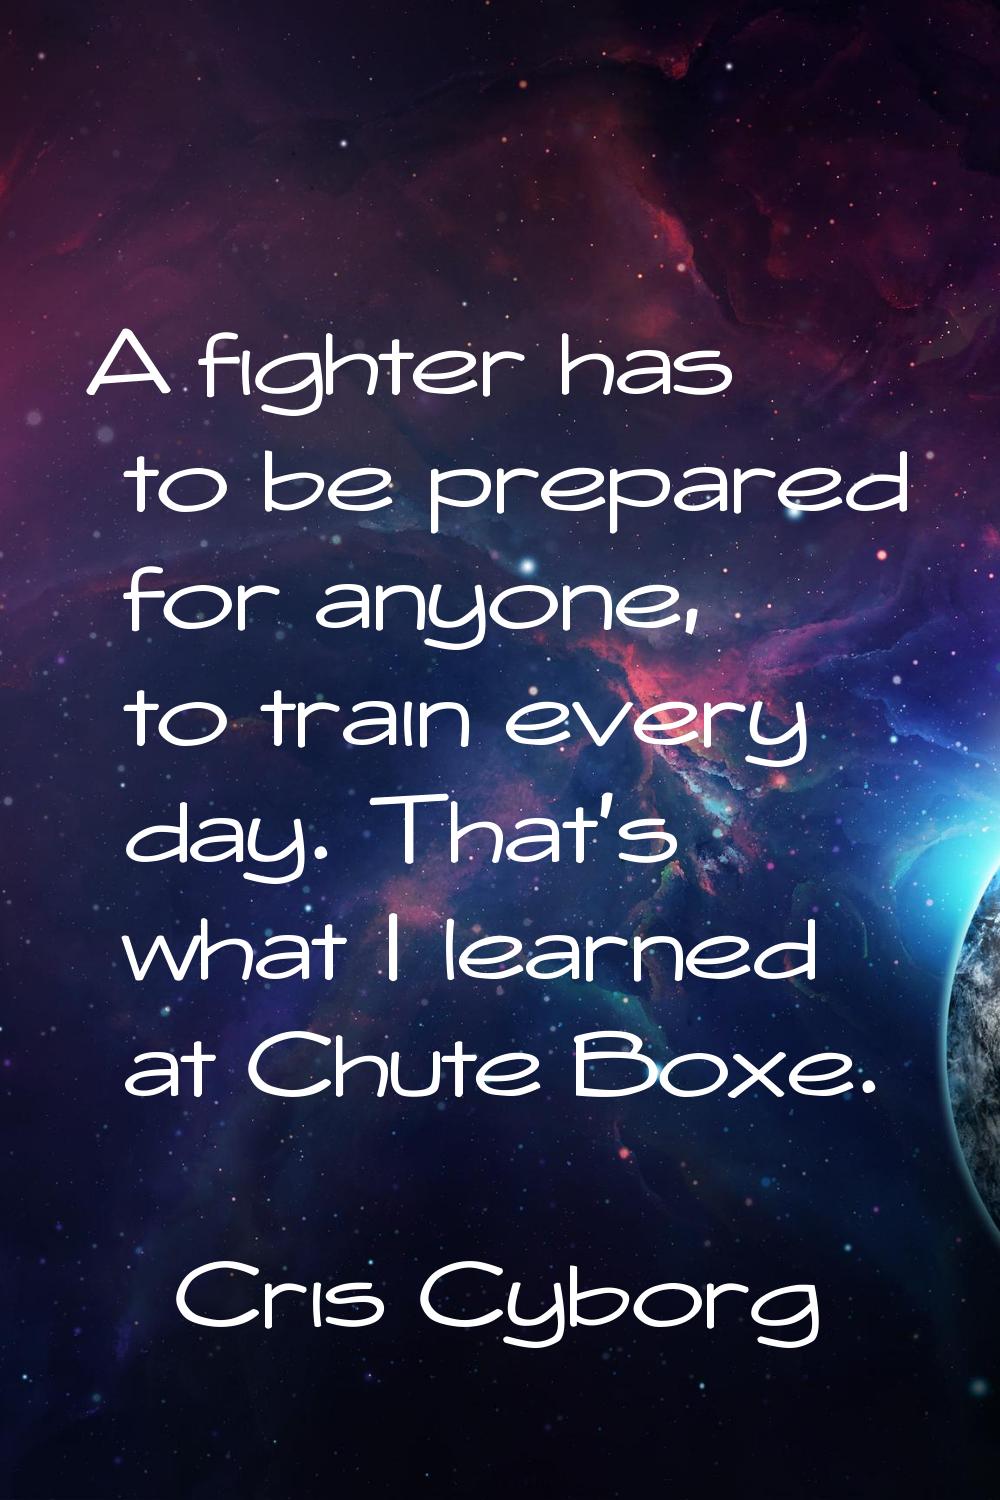 A fighter has to be prepared for anyone, to train every day. That's what I learned at Chute Boxe.